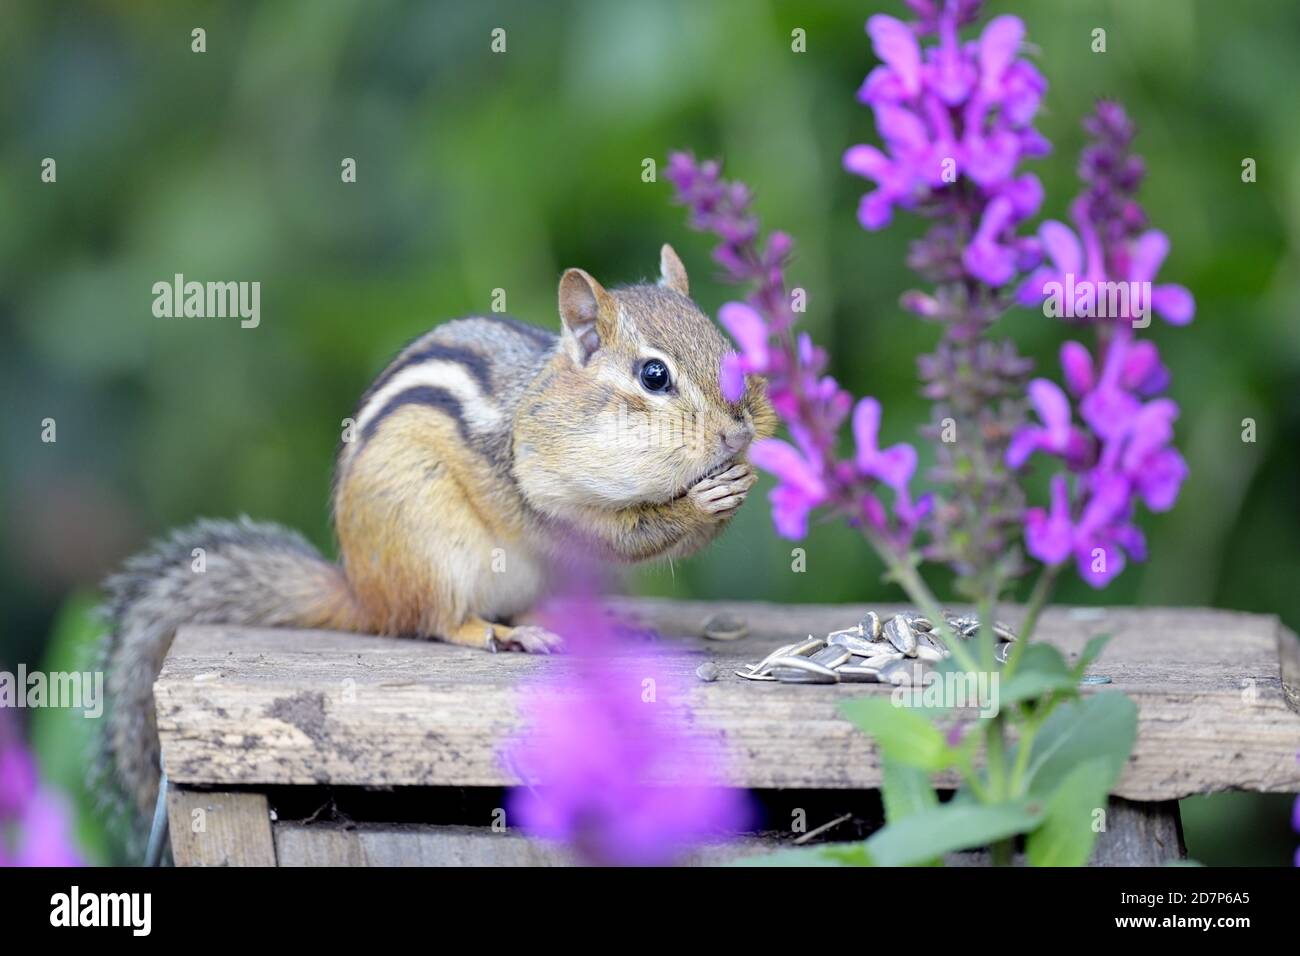 An Eastern Chipmunk among flowers eating seeds Stock Photo